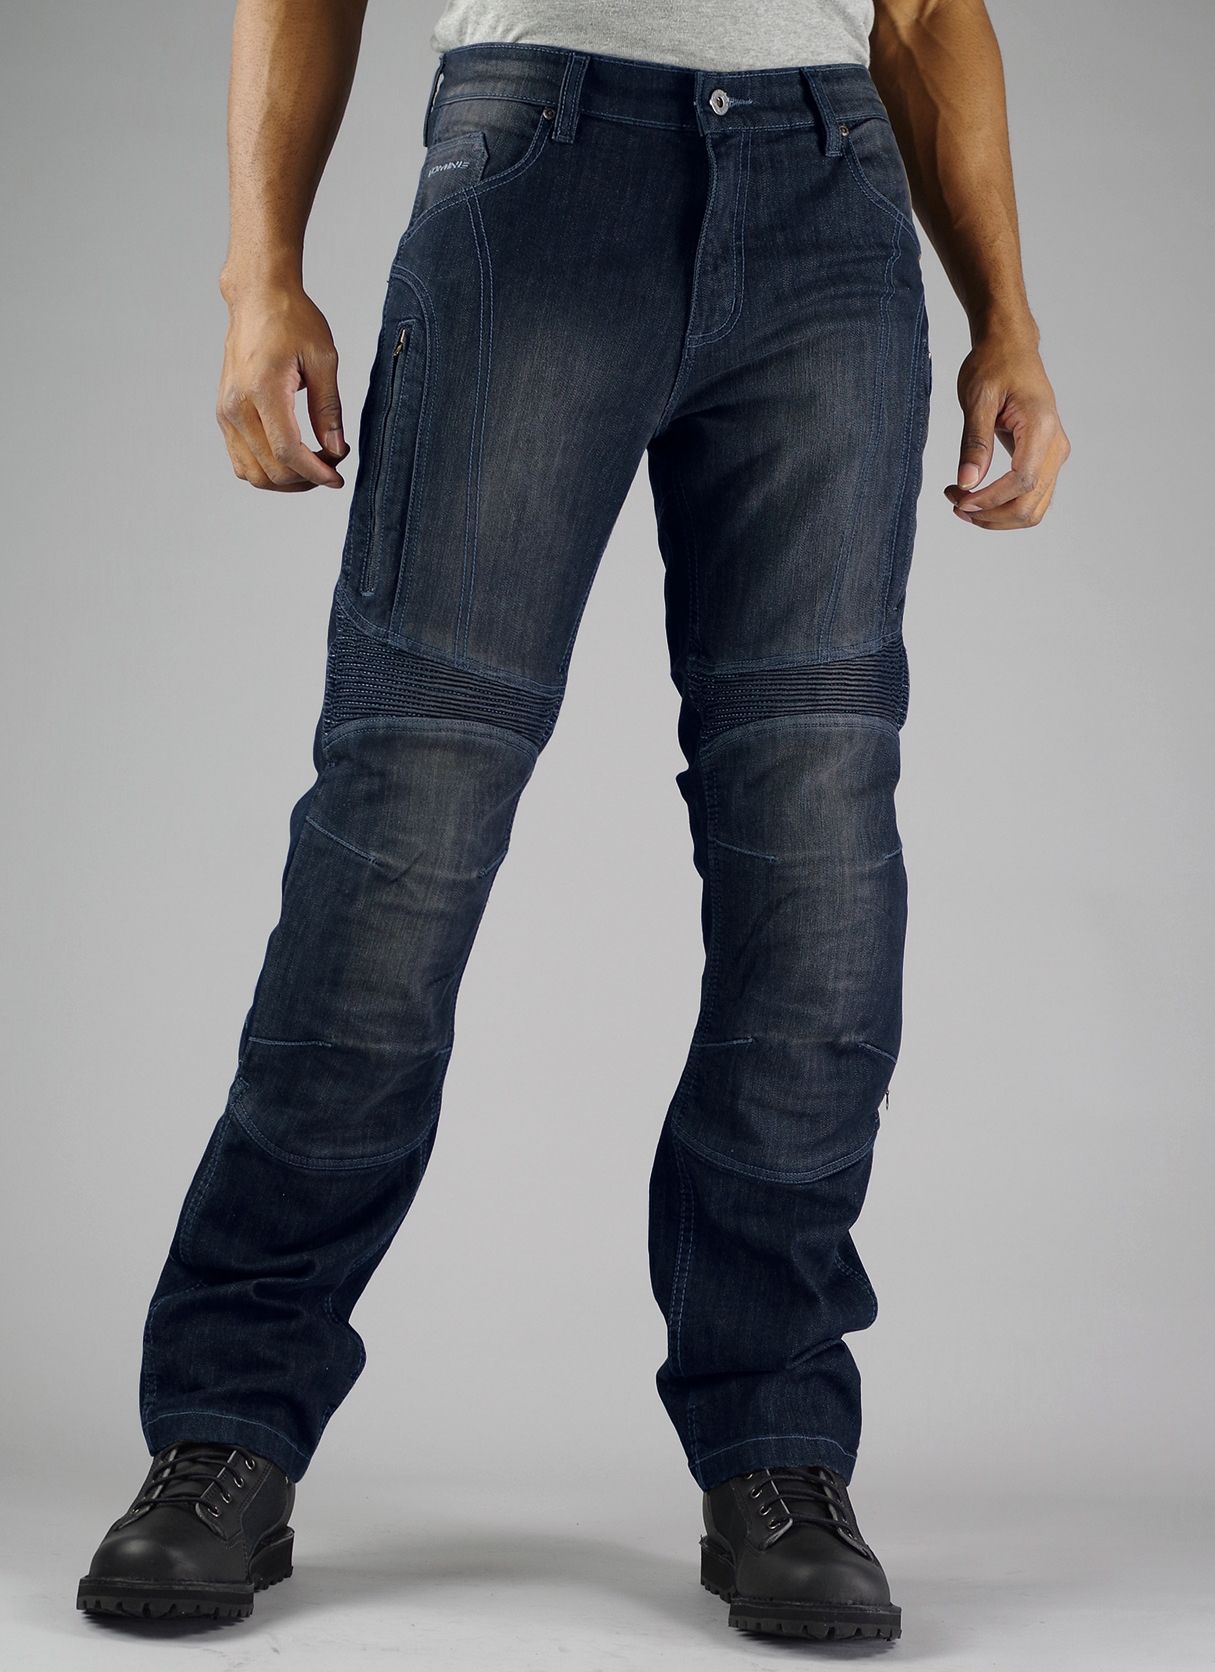 h&m coated jeans